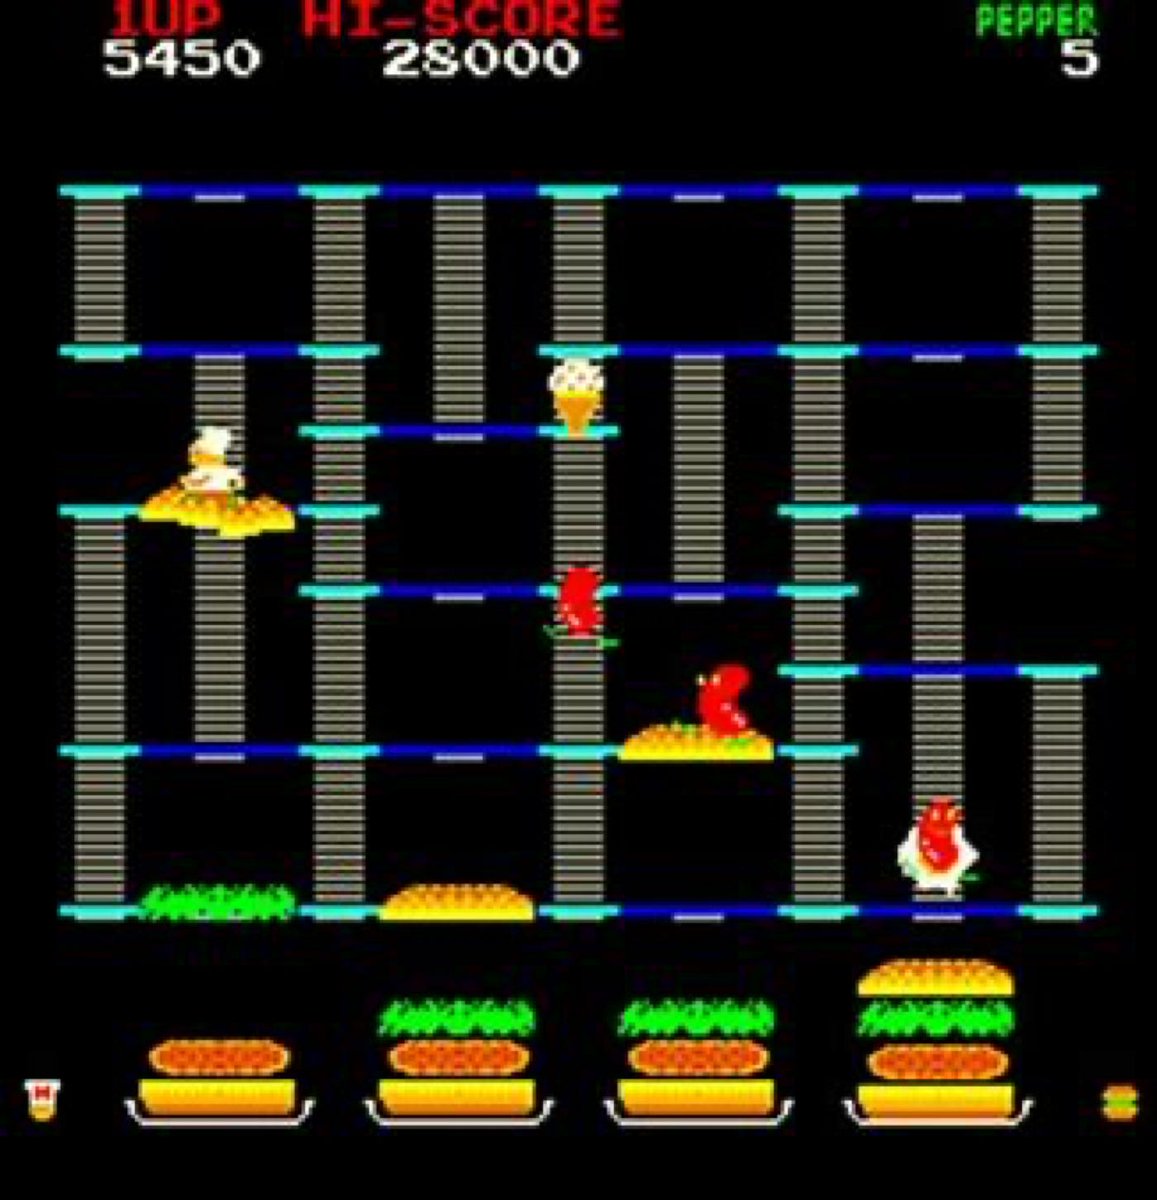 Happy #HamburgerDay! 🍔

BurgerTime (or Hamburger in Japan) was an arcade game released in 1982 by Data East. It was later ported onto Intellivision, Atari, ColecoVision, NES, and more!